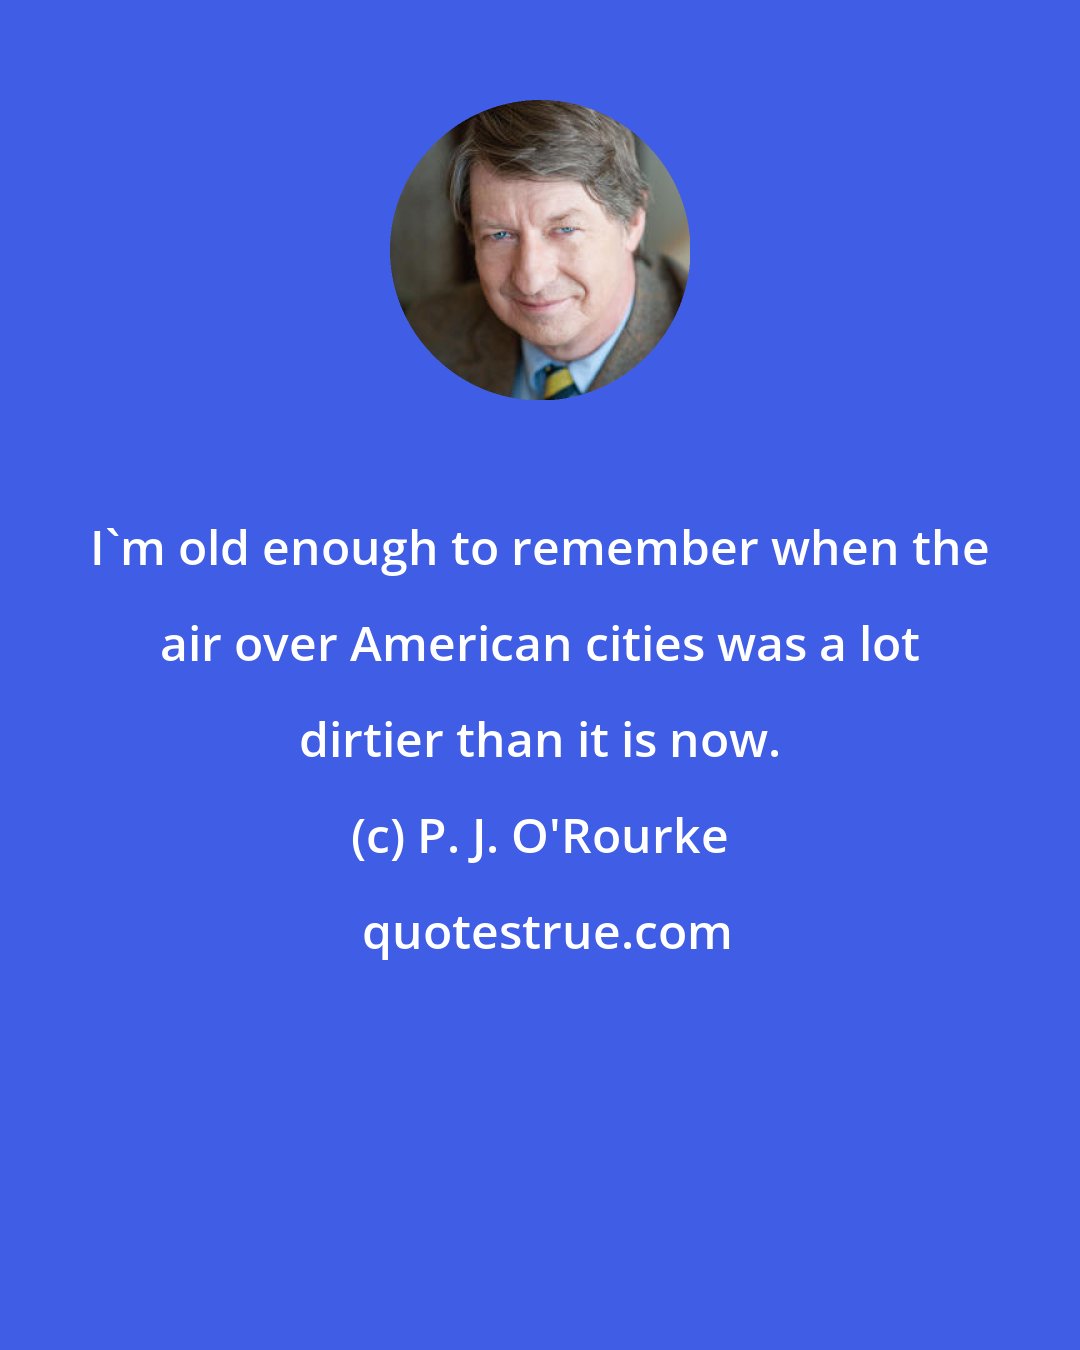 P. J. O'Rourke: I'm old enough to remember when the air over American cities was a lot dirtier than it is now.